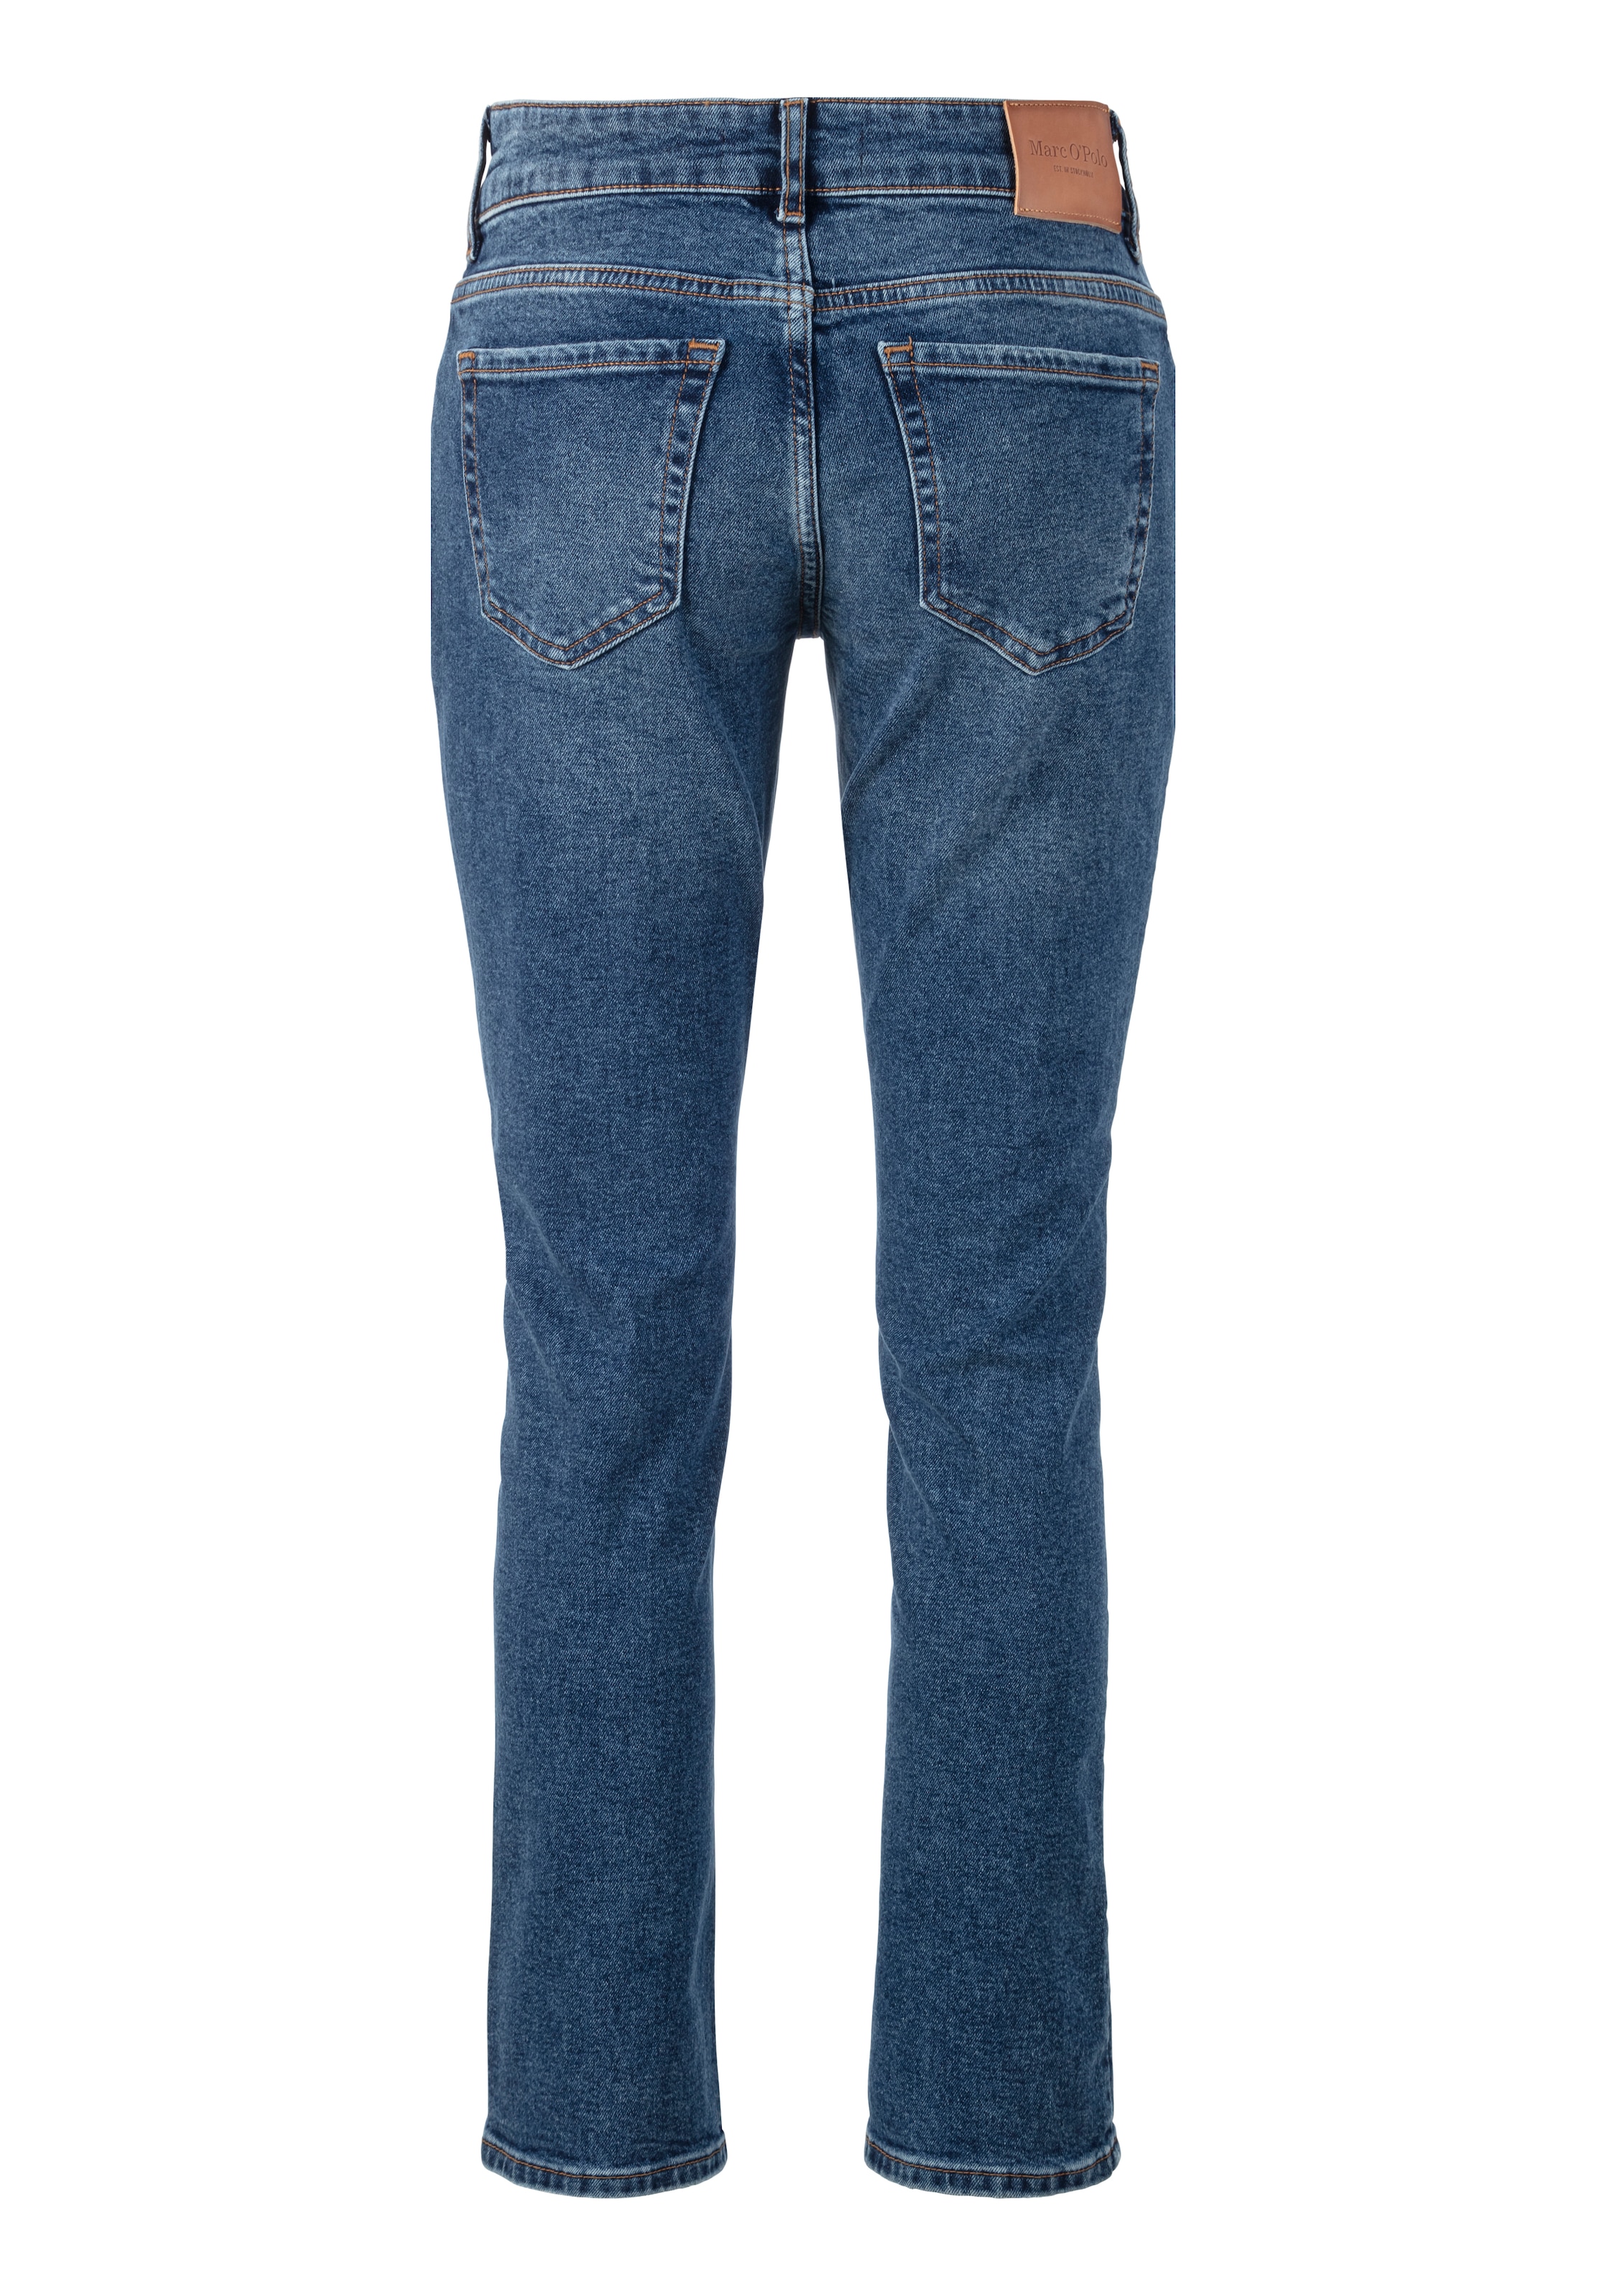 Marc O'Polo 5-Pocket-Jeans »Alby Straight«, mit gerader Beinform